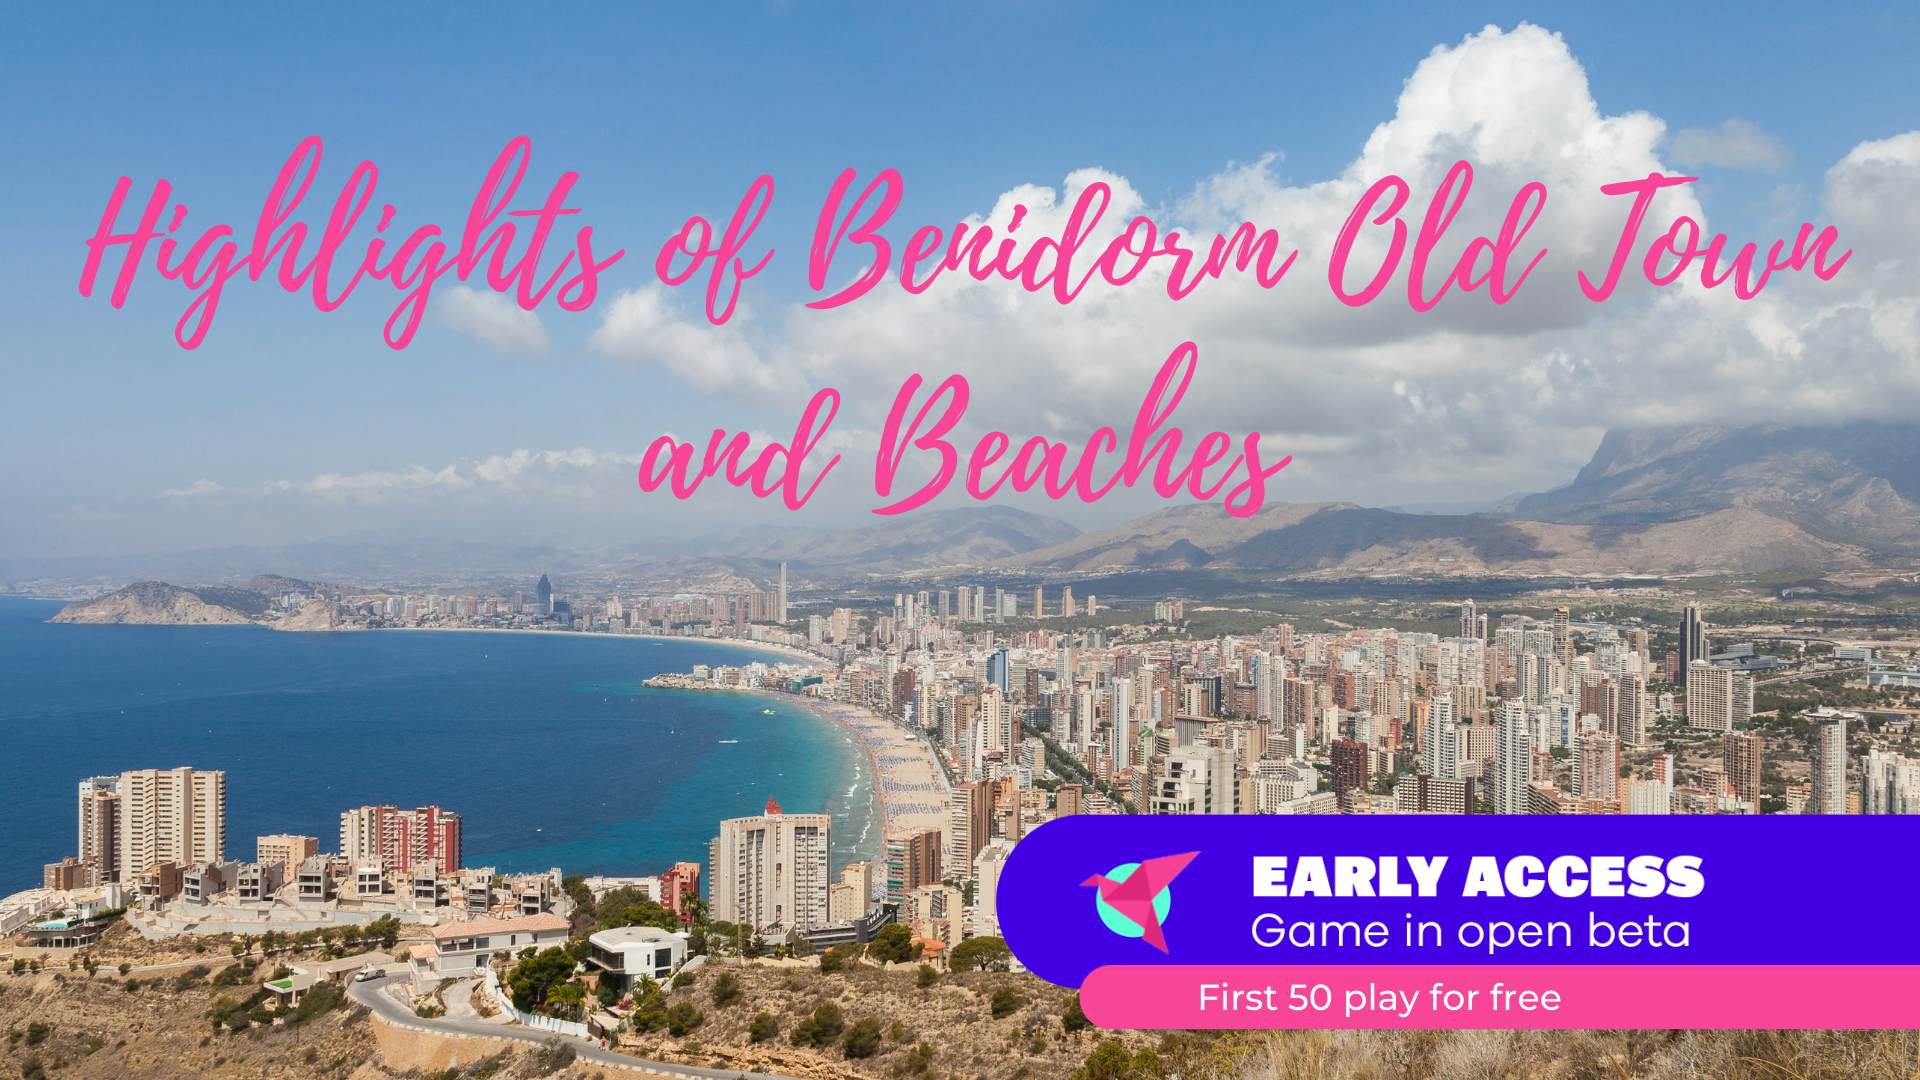 Highlights of Benidorm Old Town and Beaches image